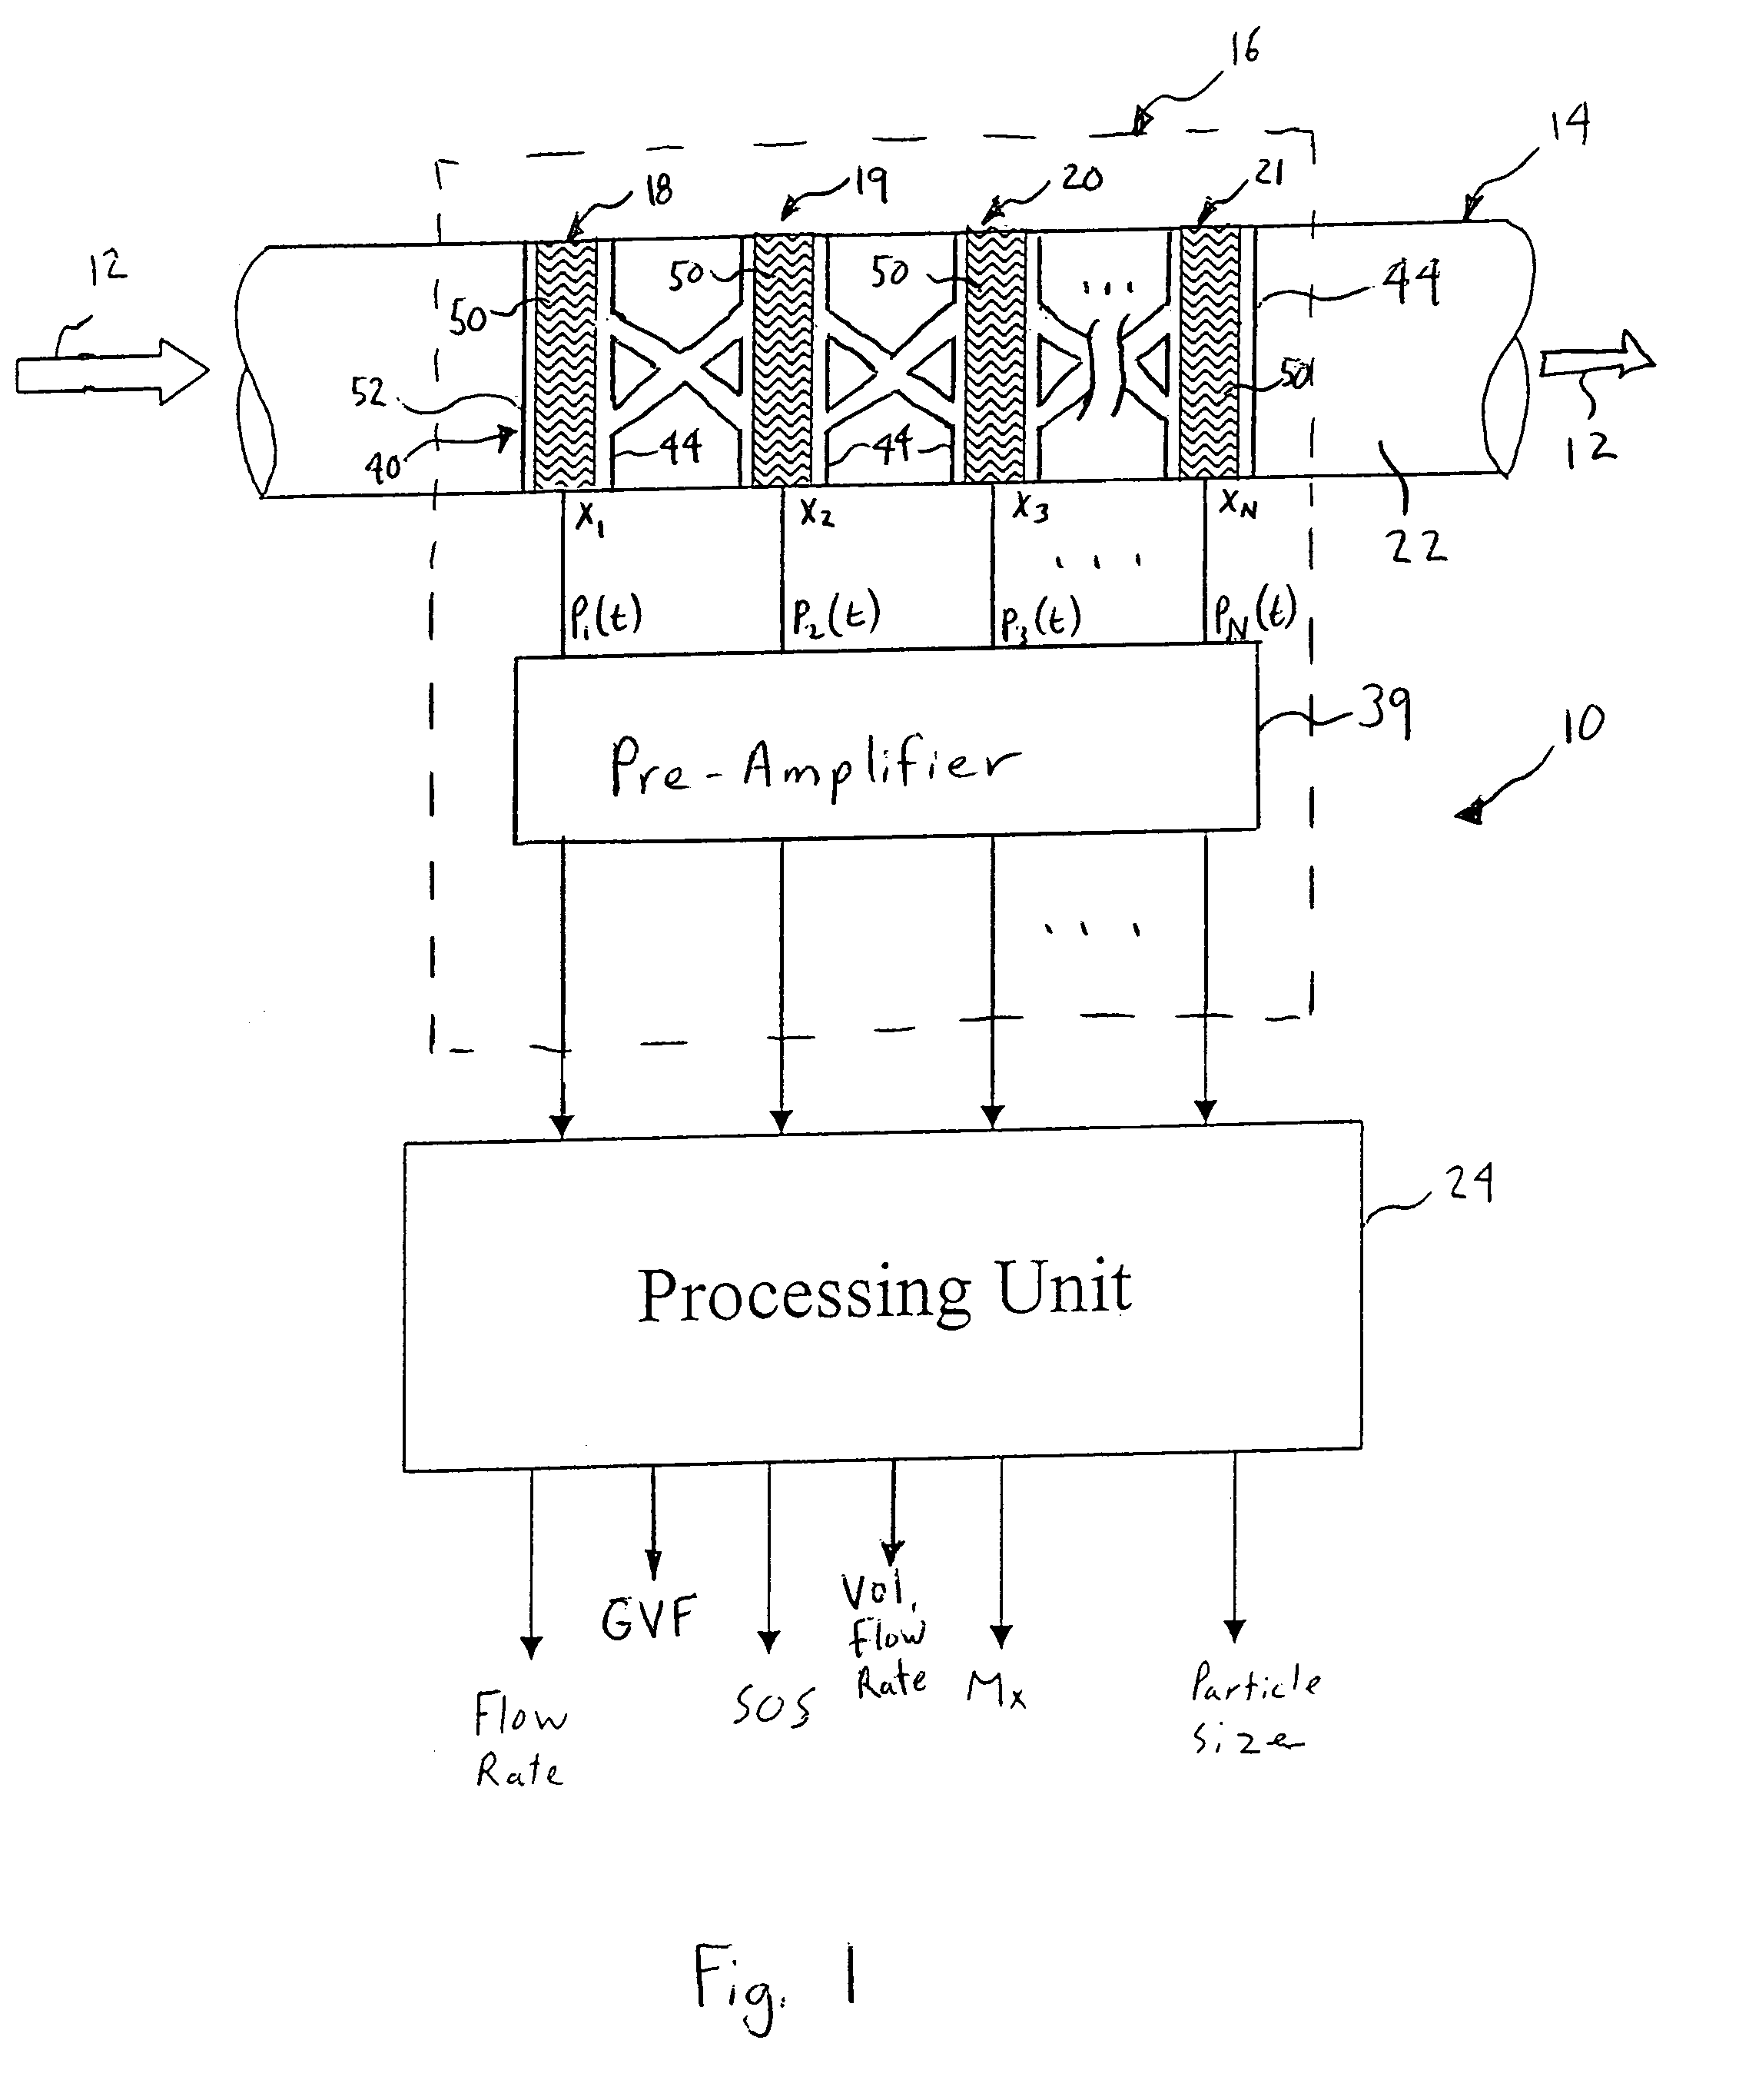 Apparatus having a multi-band sensor assembly for measuring a parameter of a fluid flow flowing within a pipe